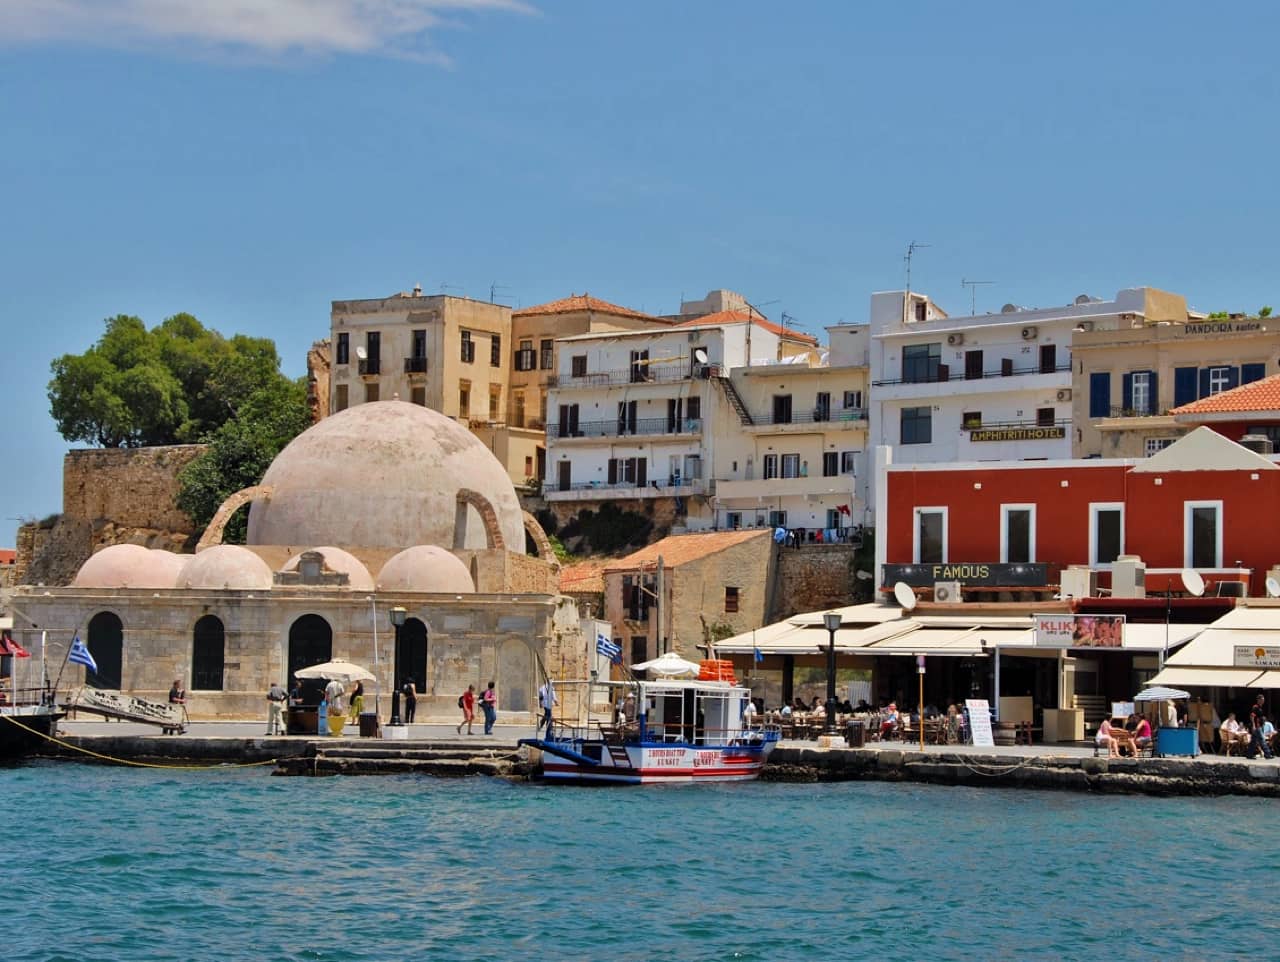 Chania Old Town Walks - Private Tour With Official Guide, best city walk tour chania crete, history social tour chania crete, city tour hania crete, activities chania crete, things to do chania, sightseeing chania crete